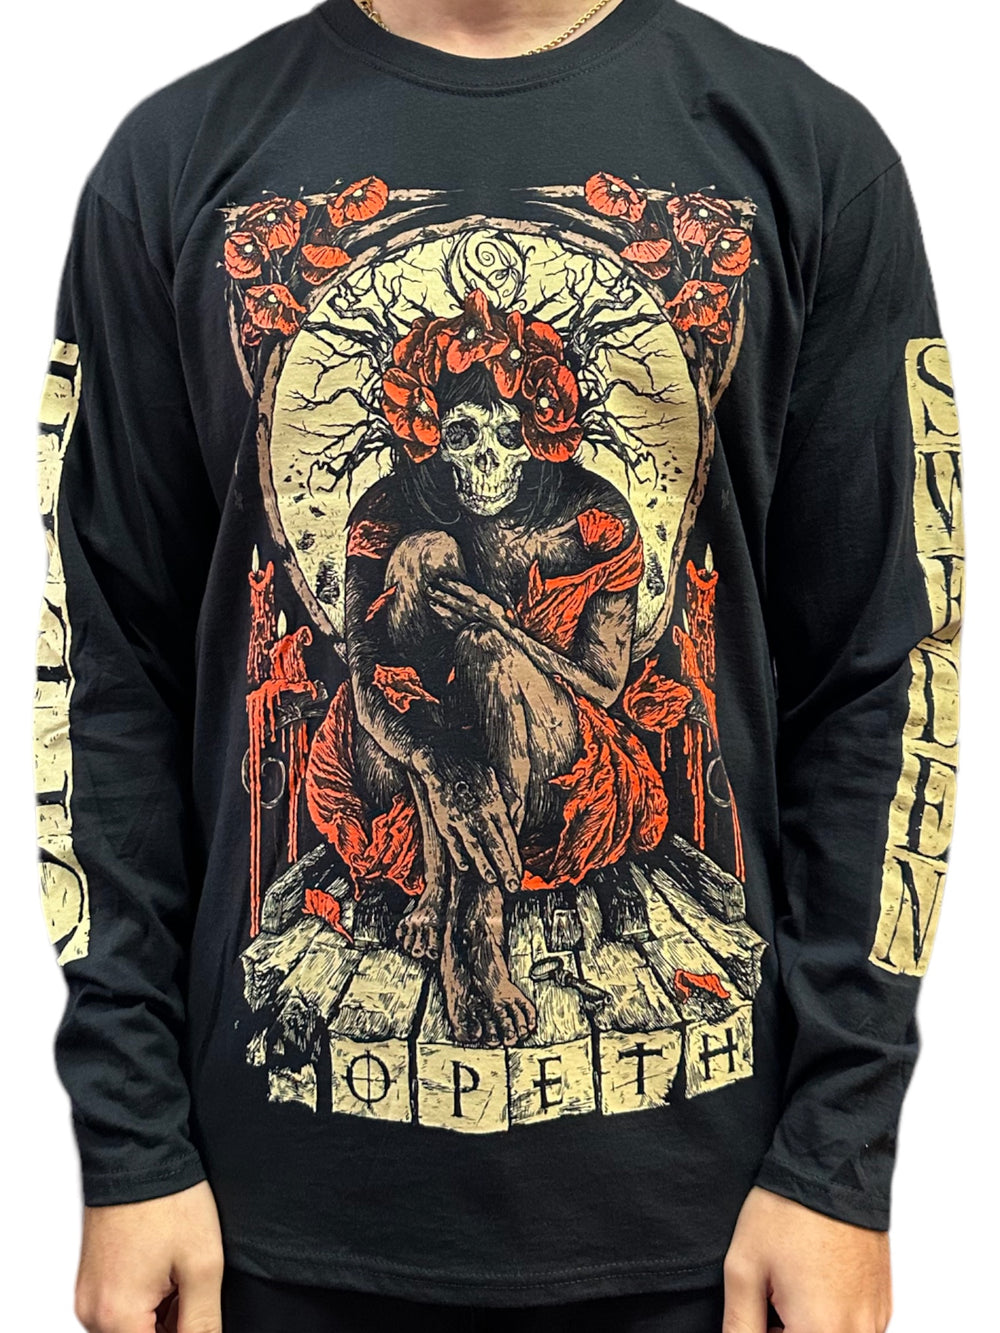 Opeth Haxprosses Official Unisex Long Sleeved Shirt Various Sizes Front & Sleeve Print: NEW